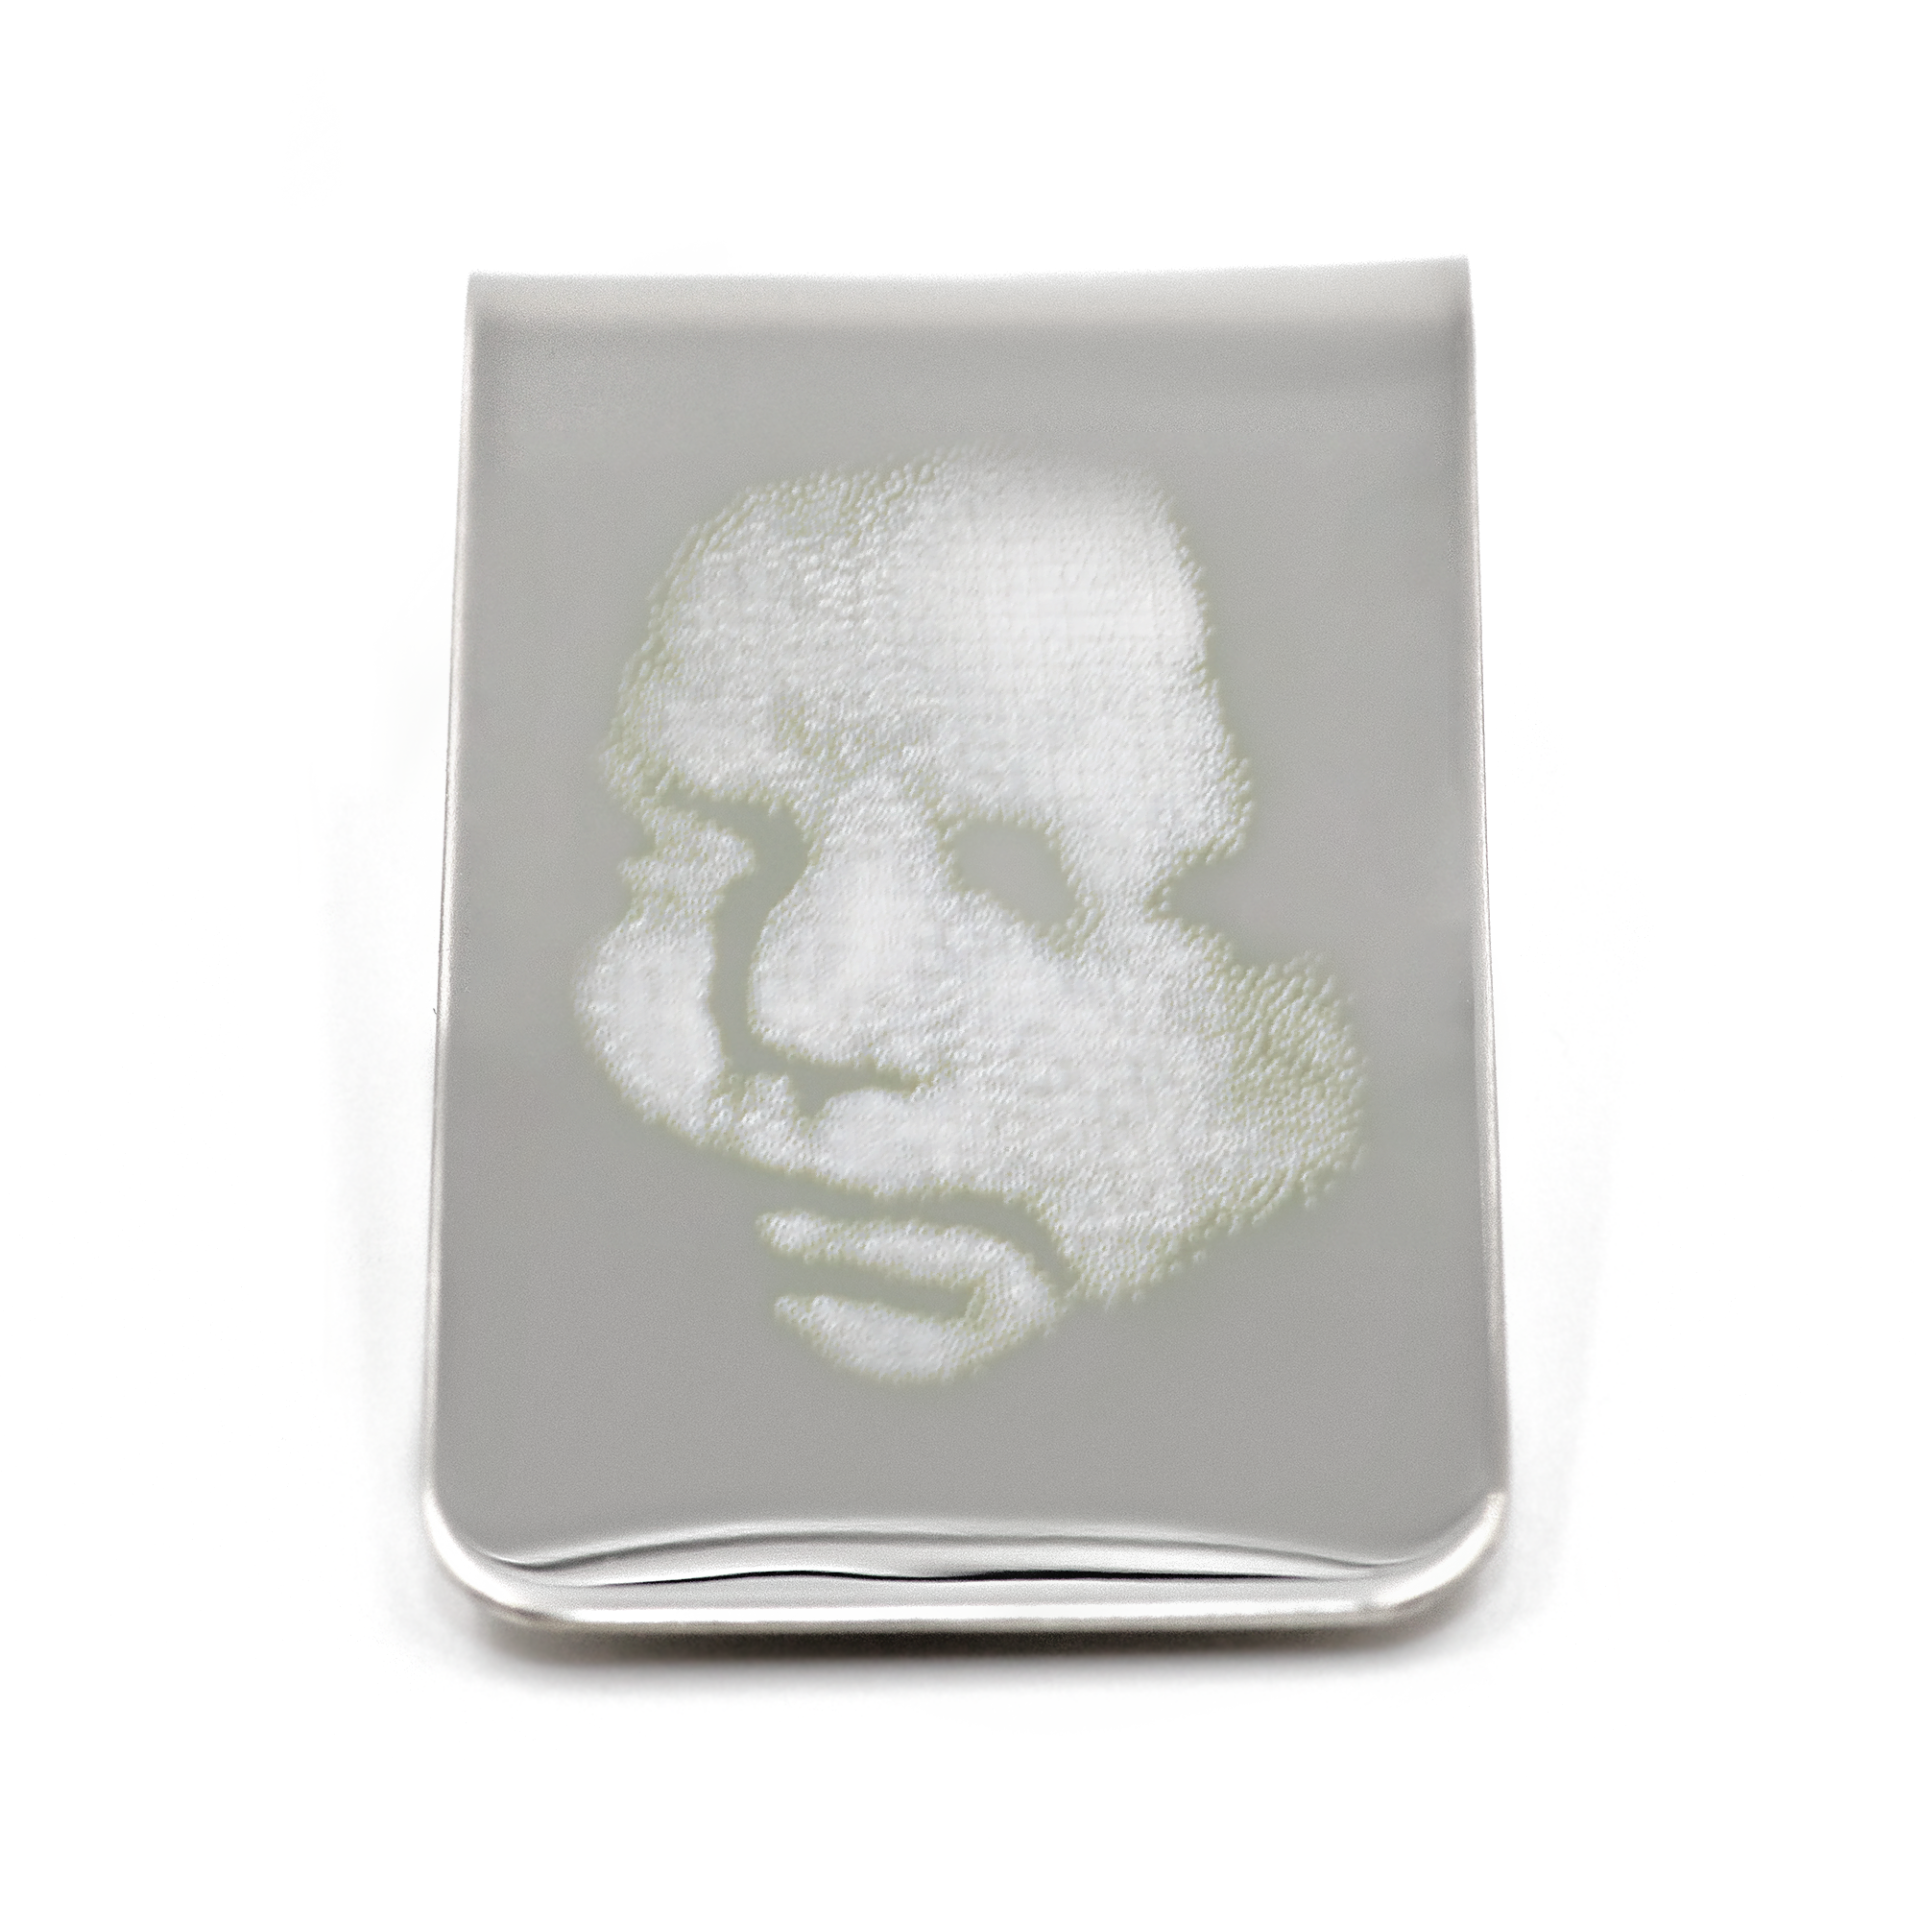 Photo Money Clip Using 3D Ultrasound Image in Stainless Steel